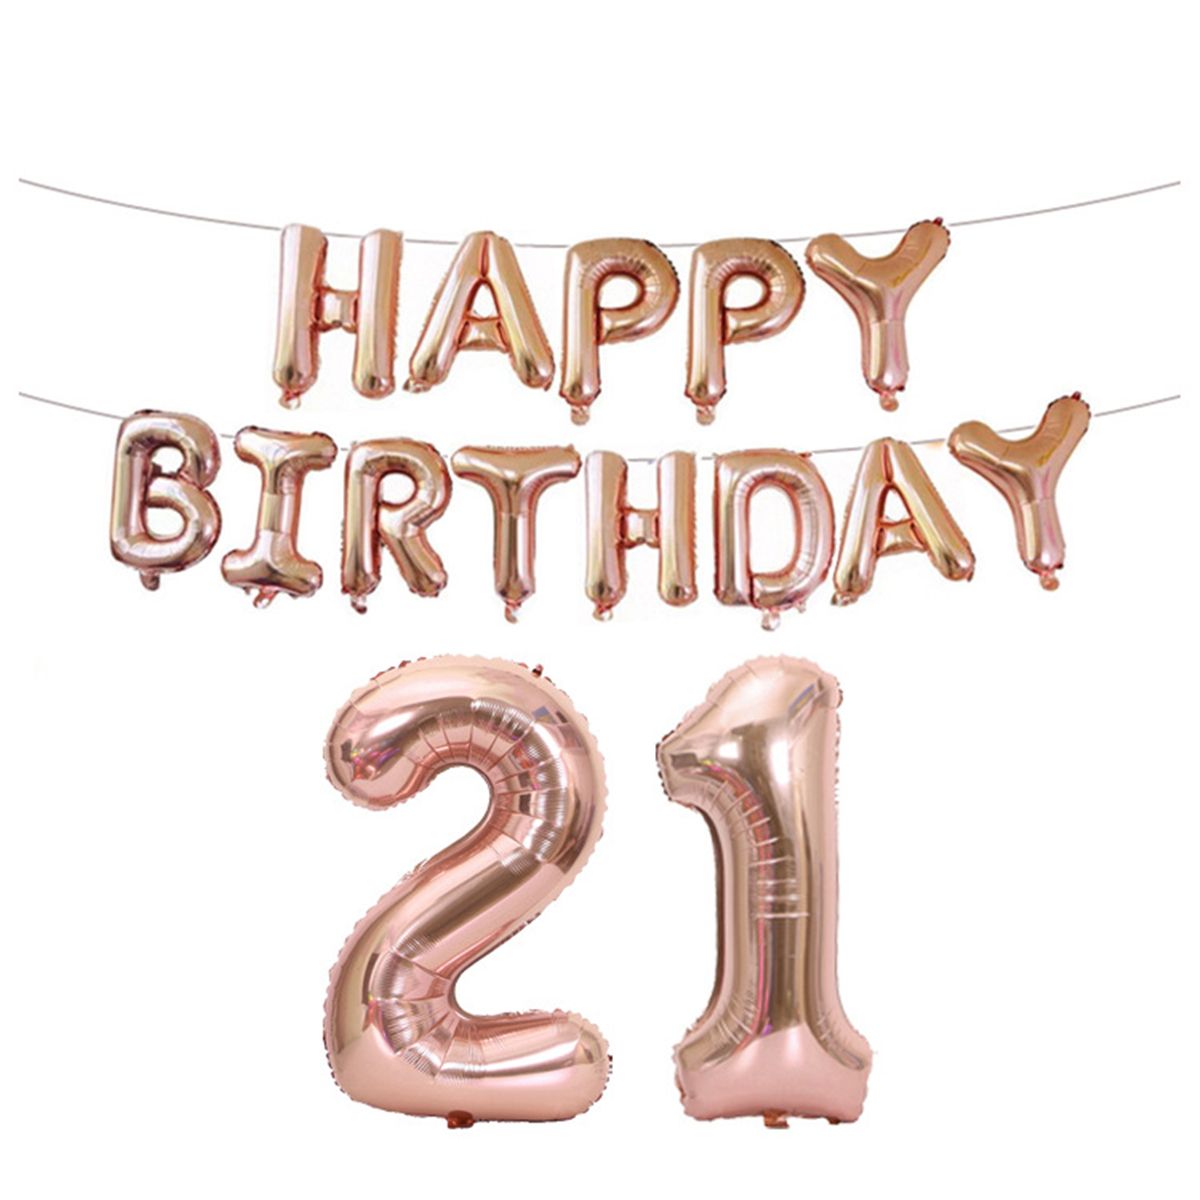 182130405060th-Rose-Gold-Happy-Birthday-Foil-Balloon-Banner-Kit-Party-Decorations-1456819